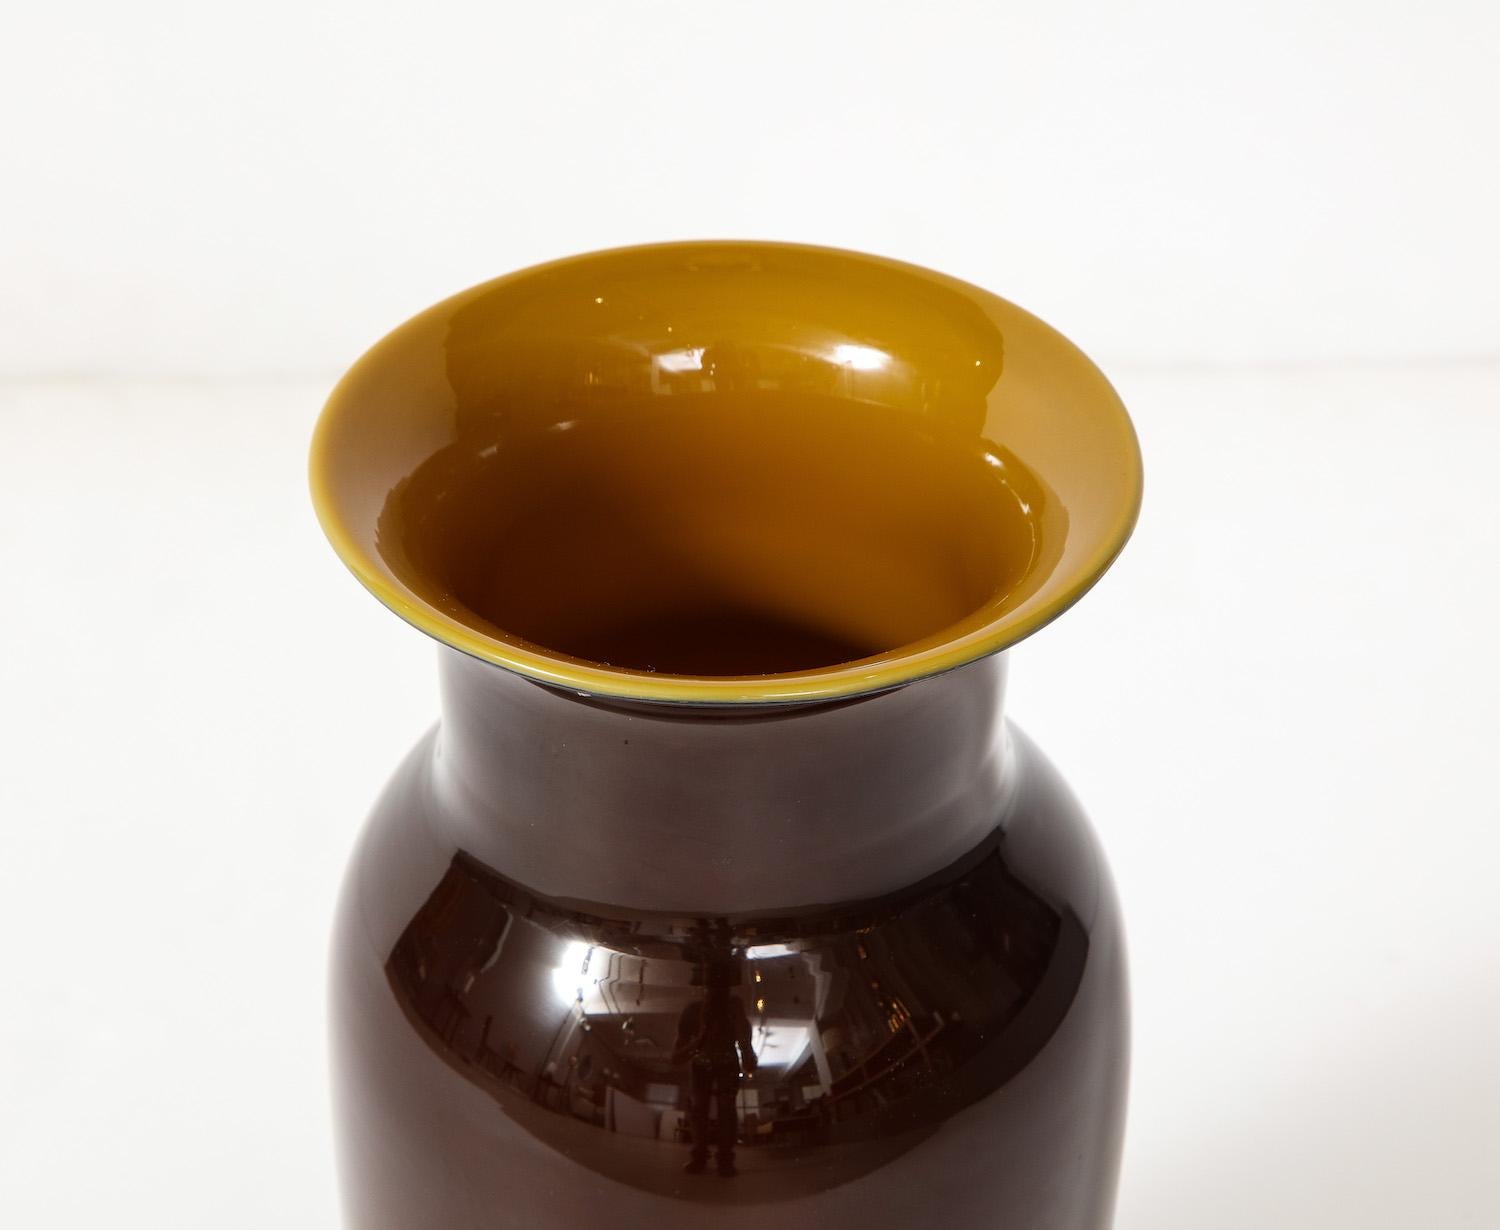 Cased glass in dark brown & gold. 3-line acid etched stamp to bottom date the production of this vase somewhere between 1945-1966.